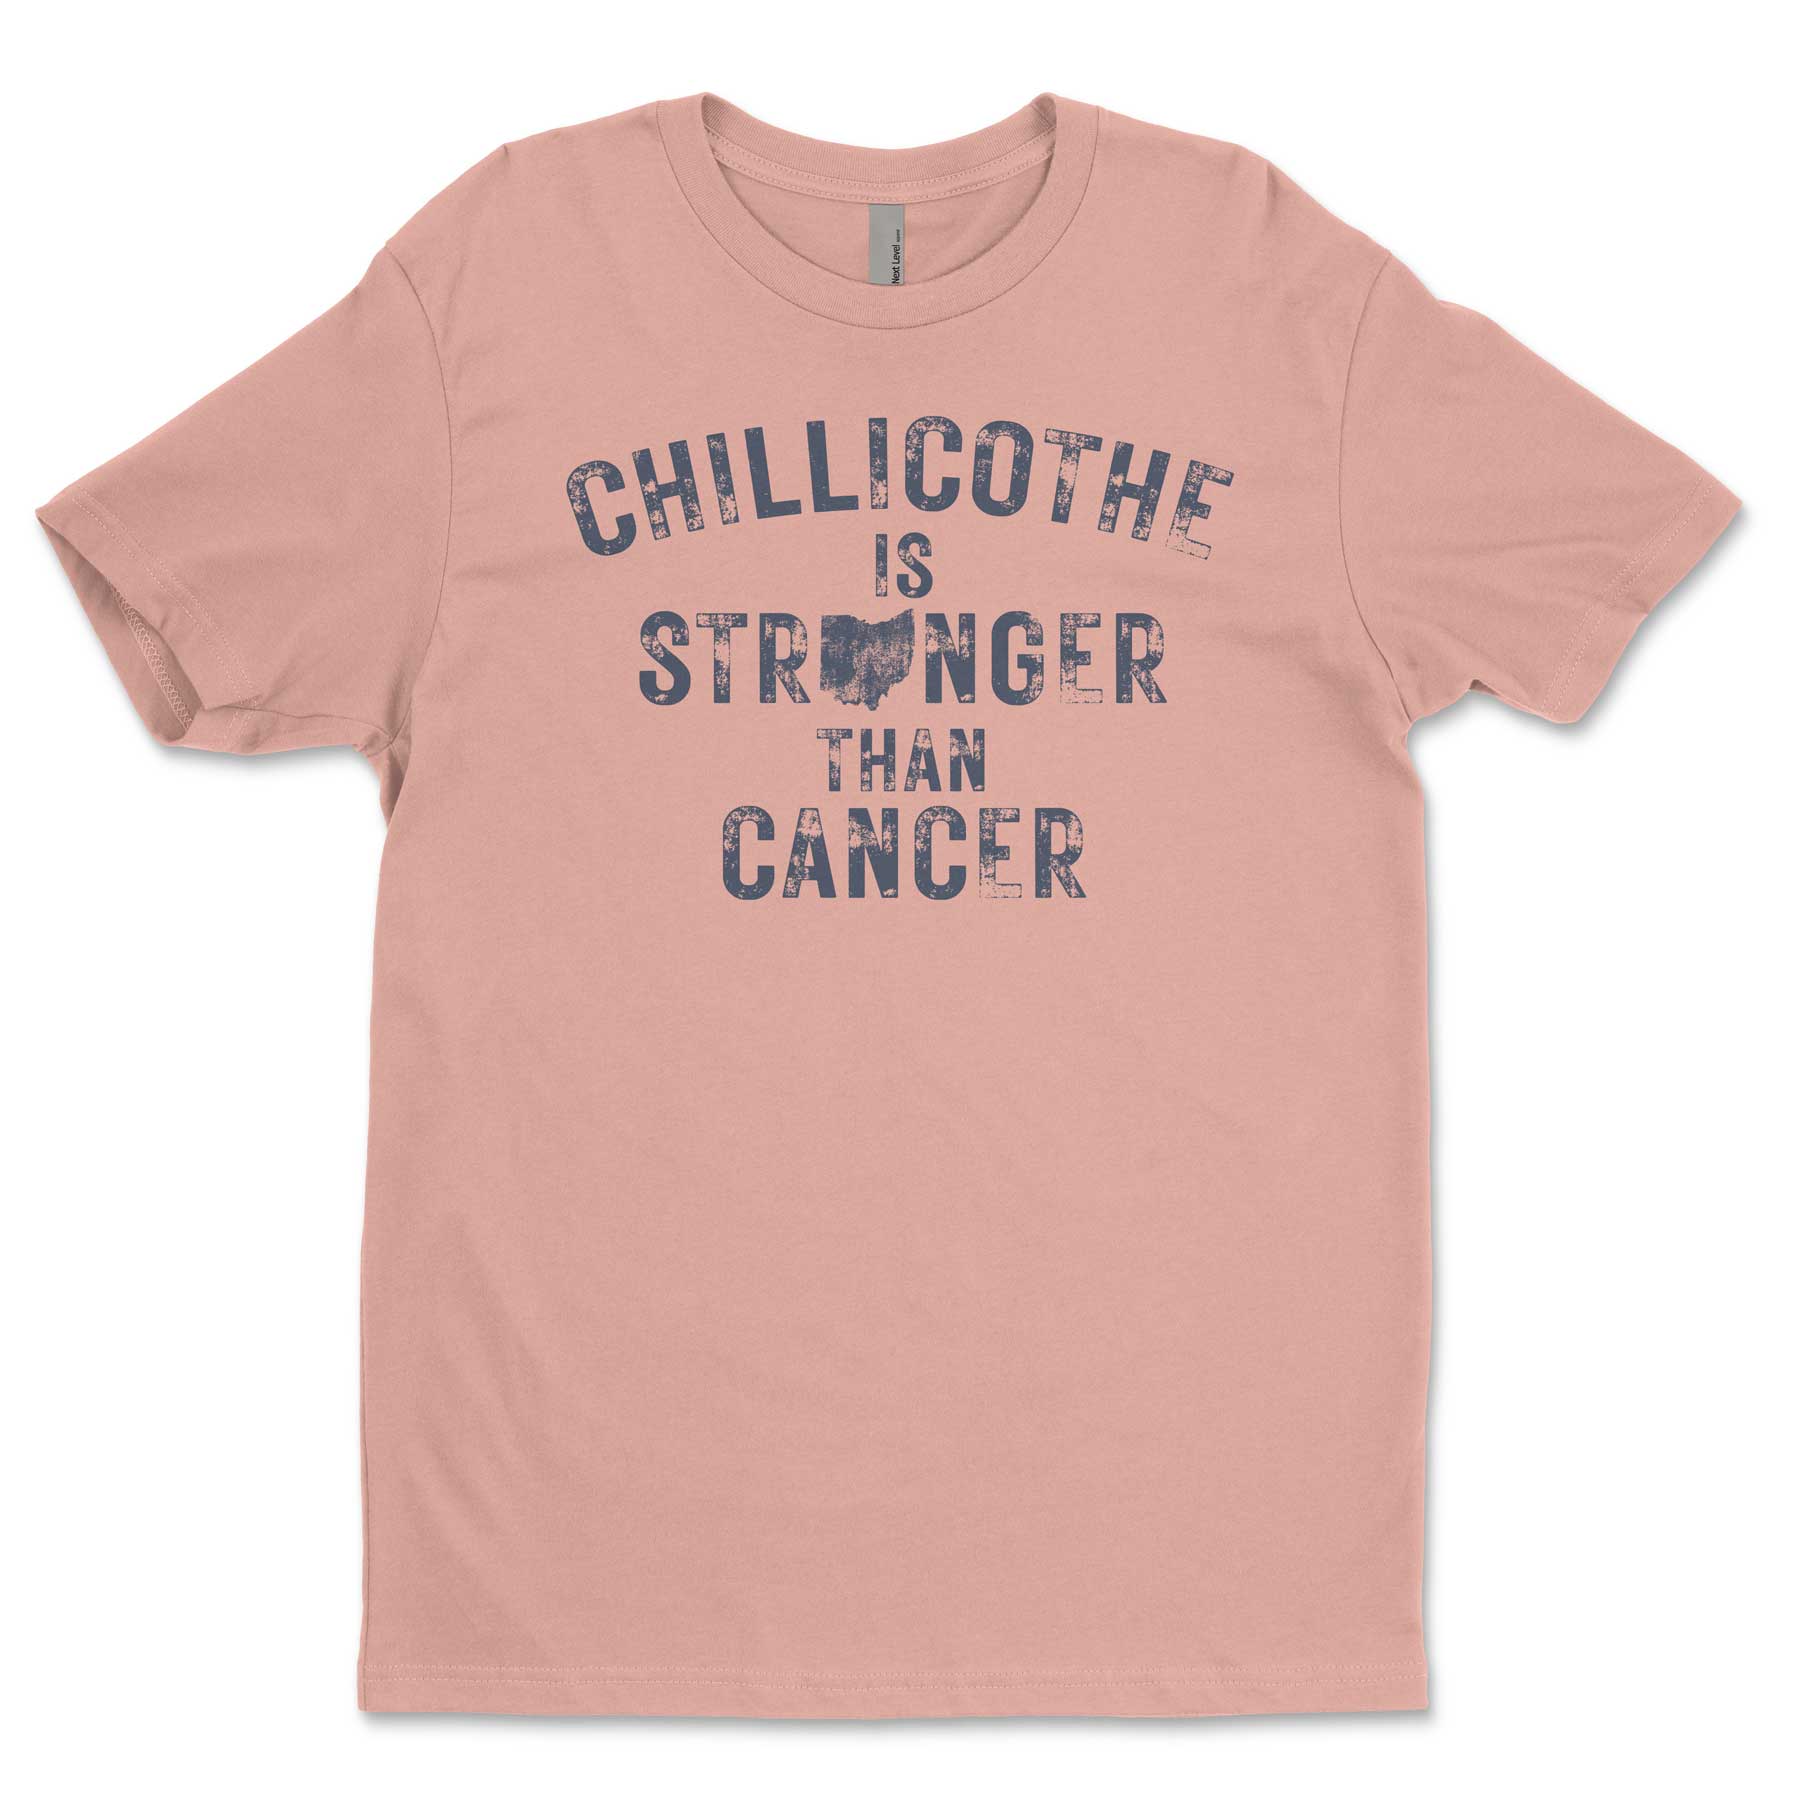 Chillicothe Is Stronger Than Cancer